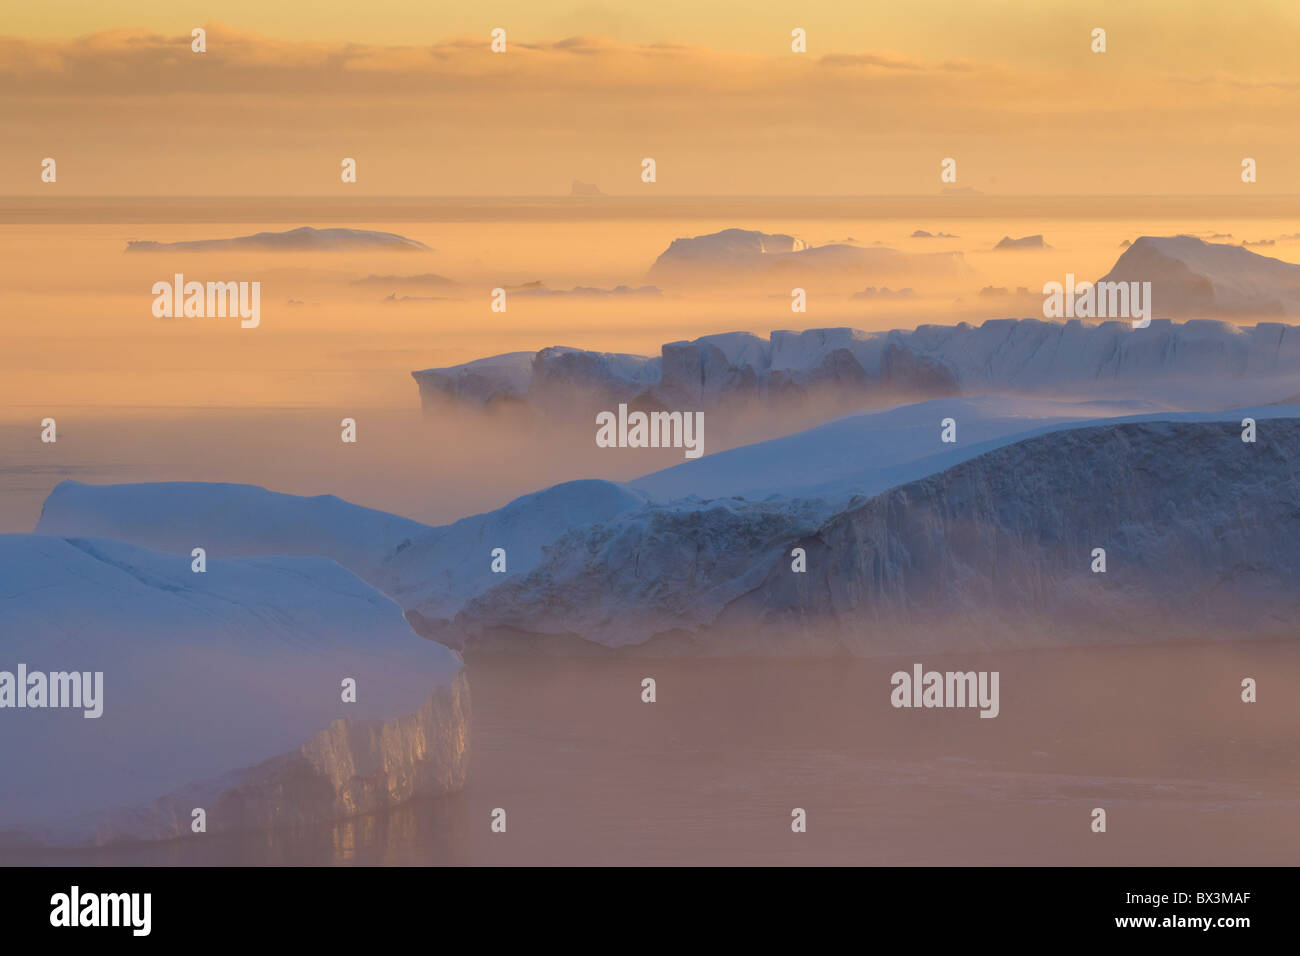 Icebergs in the mist, on UNESCO’s World Heritage List, at sunset, Kangia icefjord, Disko-Bay, West-Greenland, Greenland Stock Photo